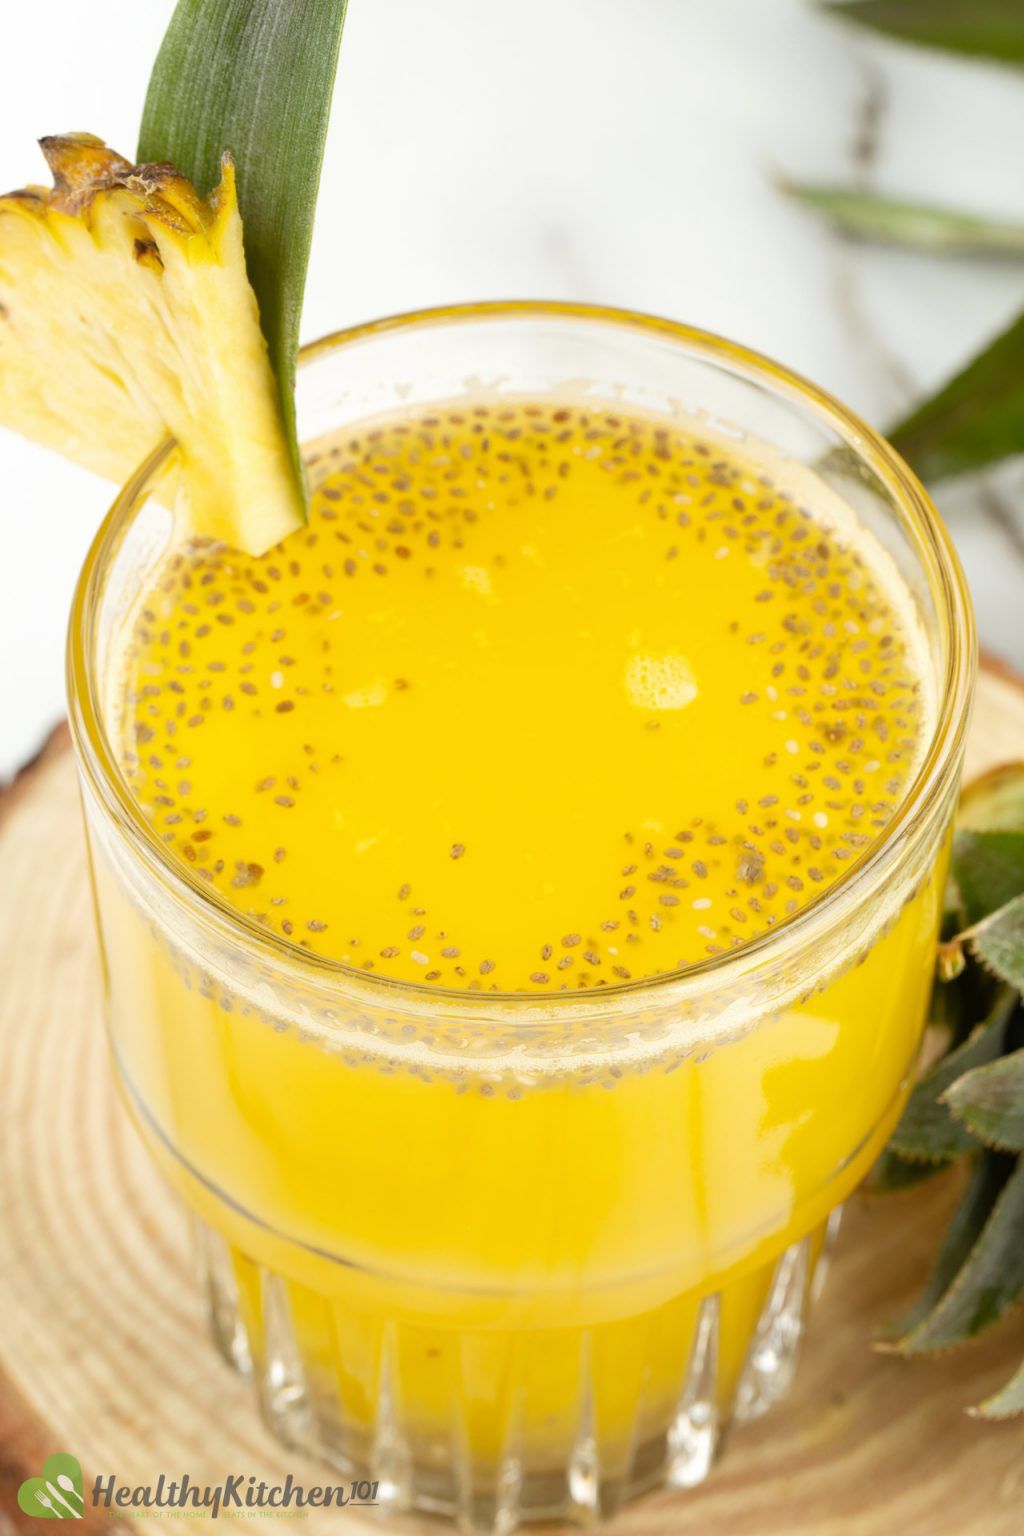 Refined SugarFree Pineapple Juice Recipe A Healthy Golden Chia Drink